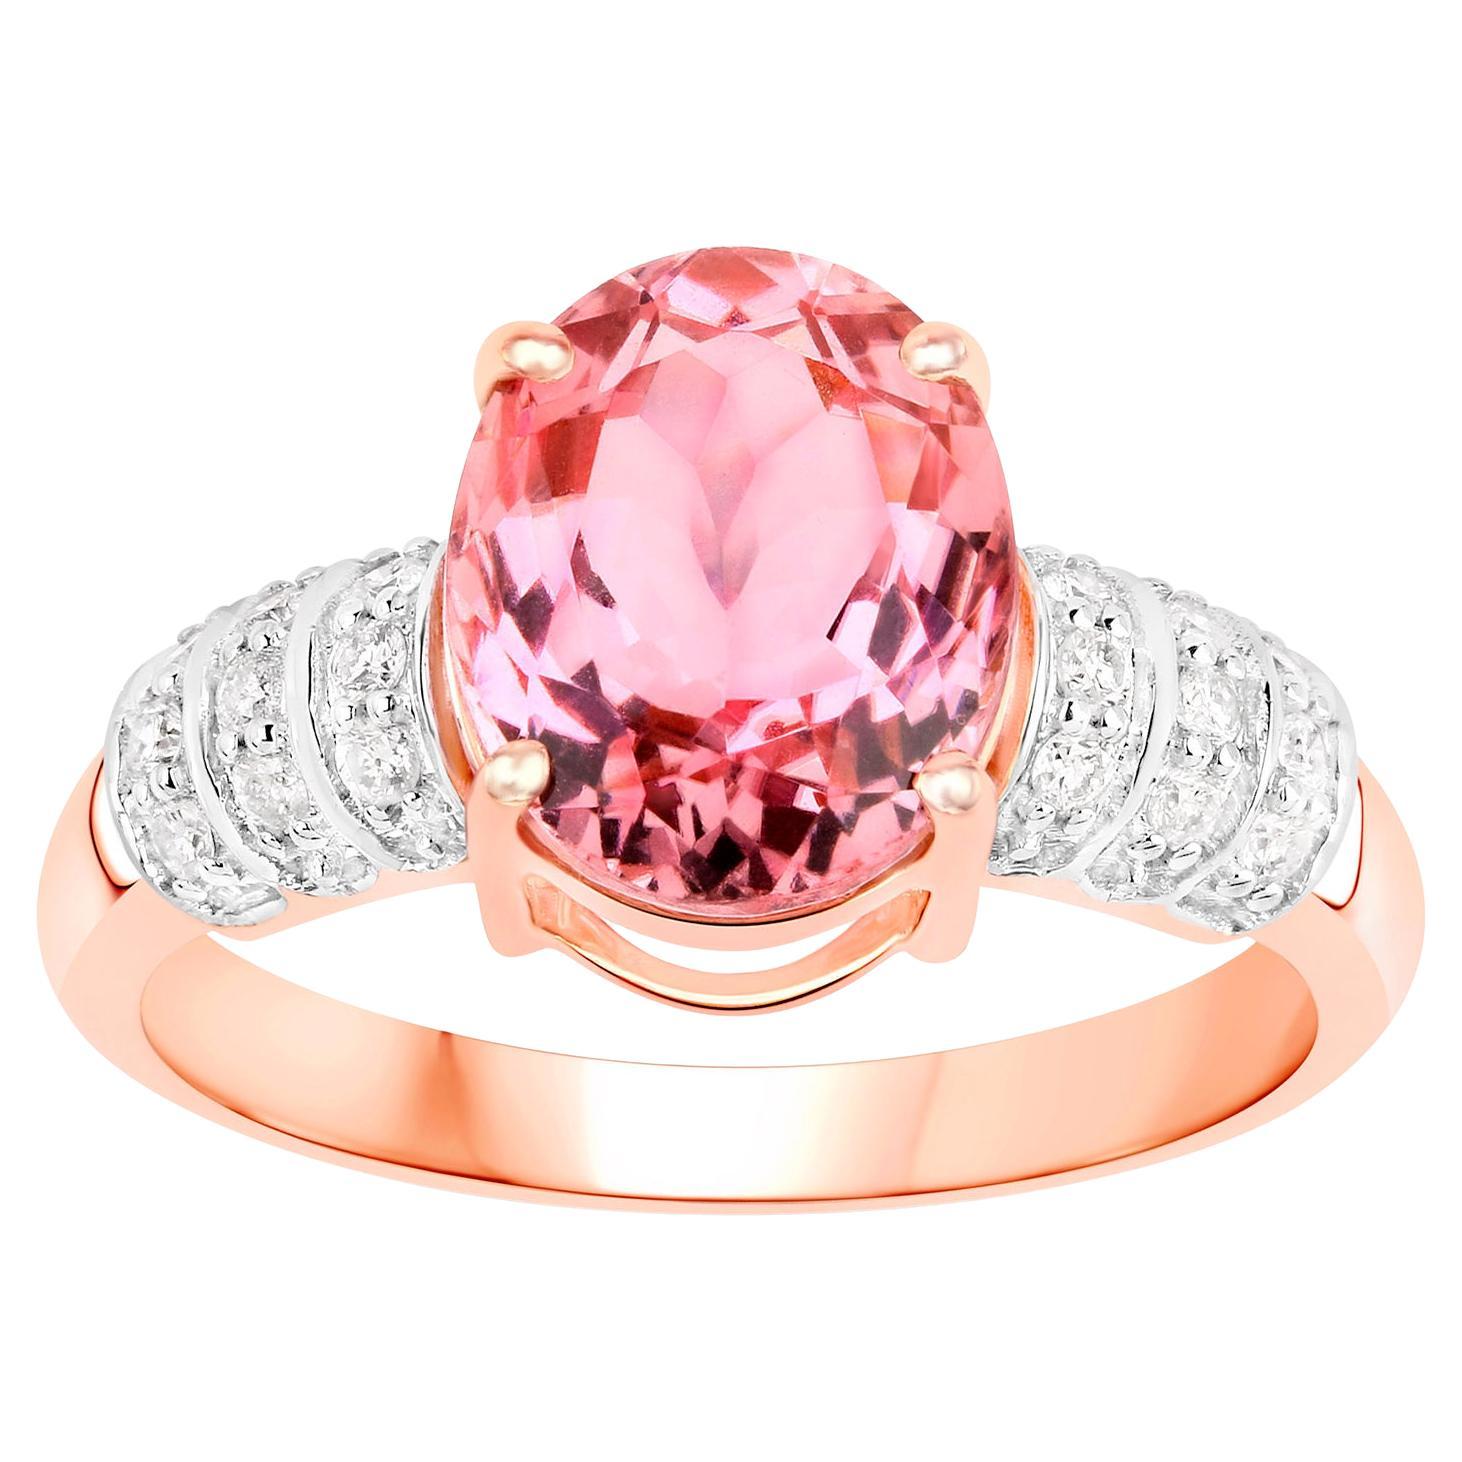 Natural Pink Tourmaline Cocktail Ring Diamond Setting 3.10 Carats 14K Rose Gold For Sale